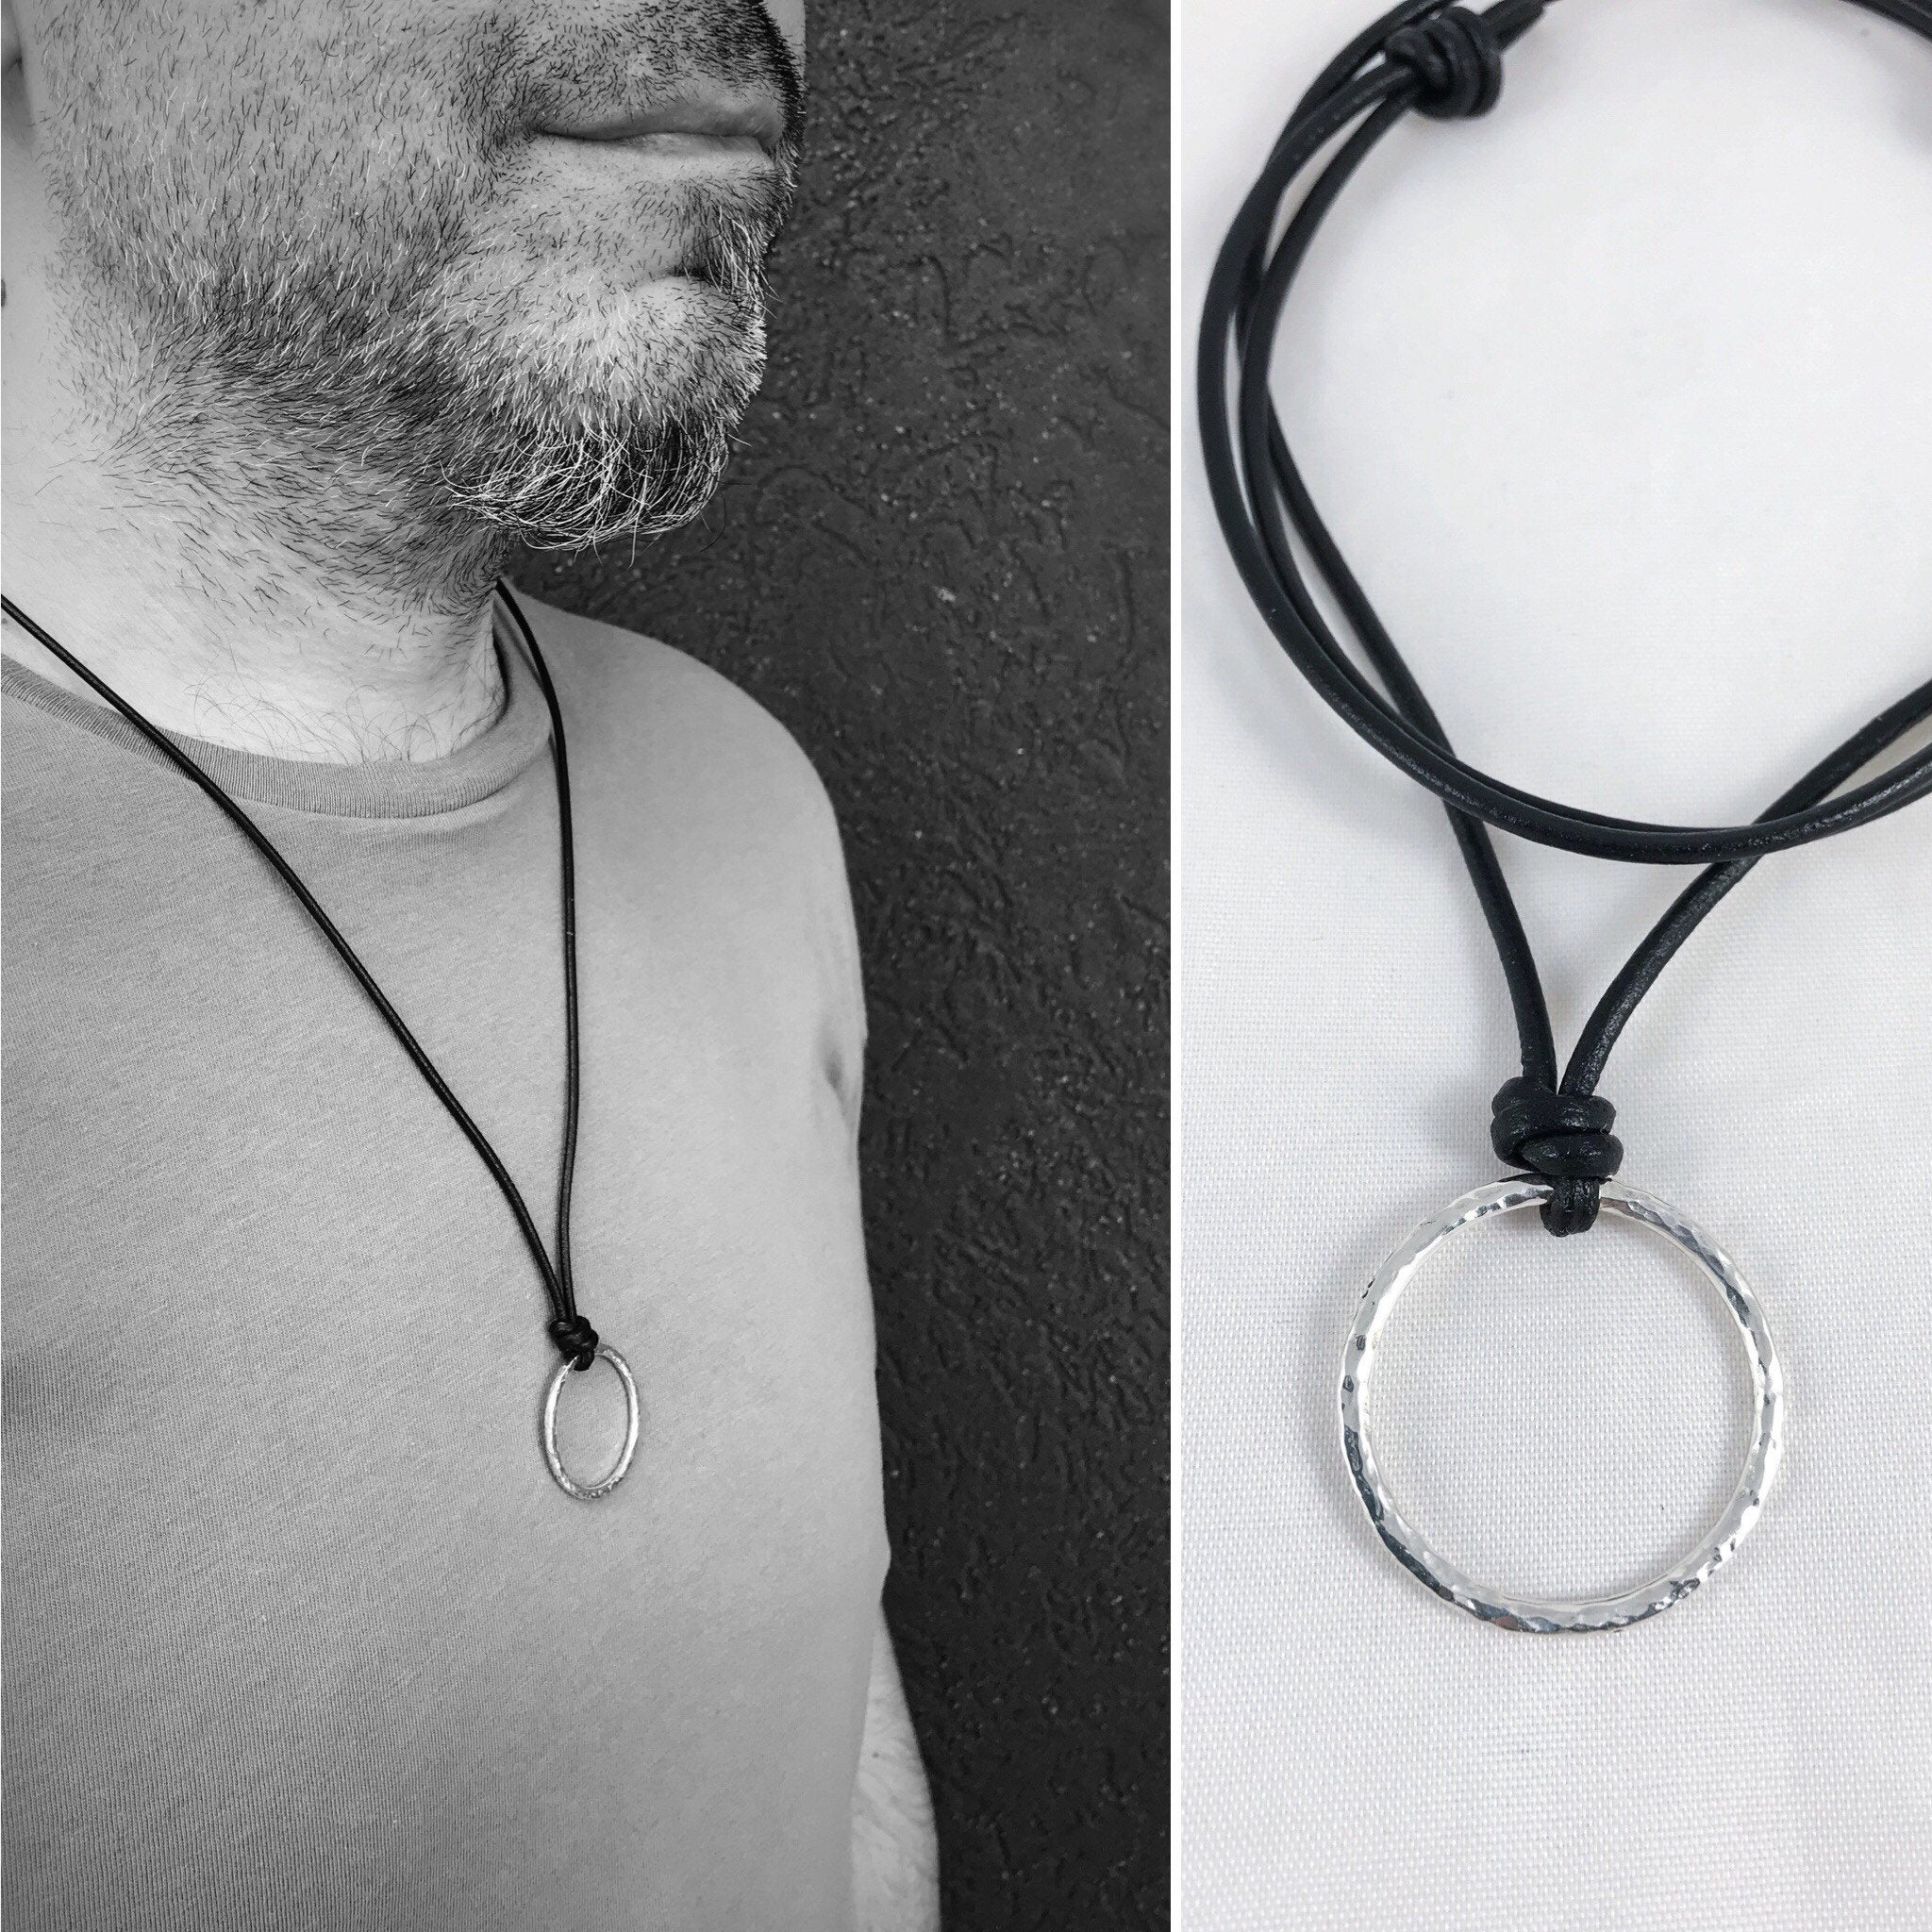 Men's Circle Necklace / Solid Sterling Silver / Rustic Hammer Forged Circle  / Adjustable Leather Cord